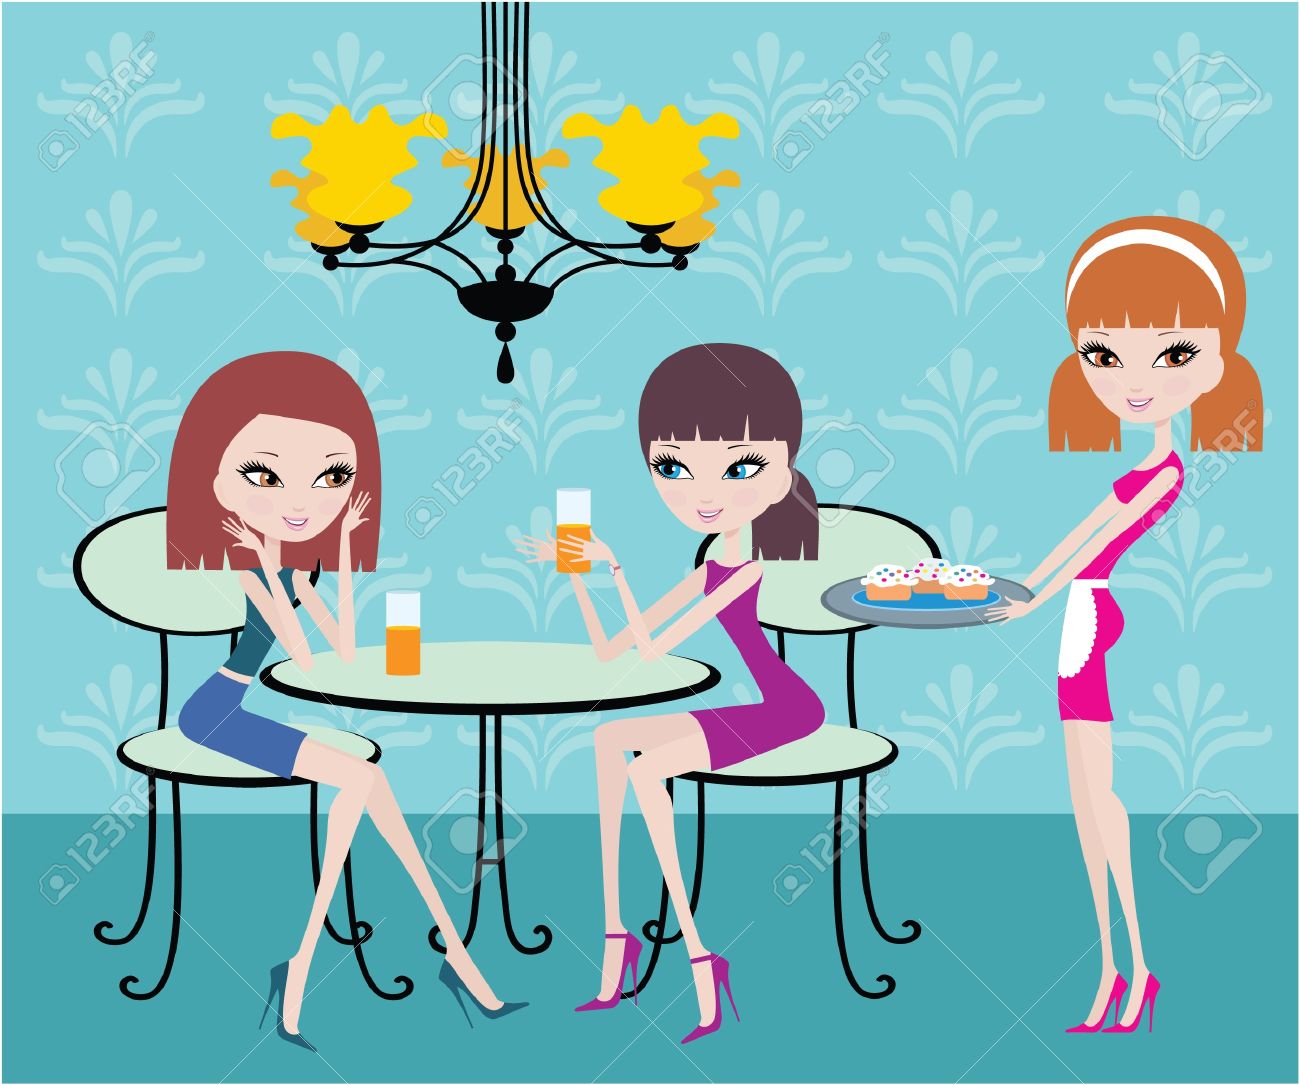 3,810 Friends Laughing Stock Vector Illustration And Royalty Free.